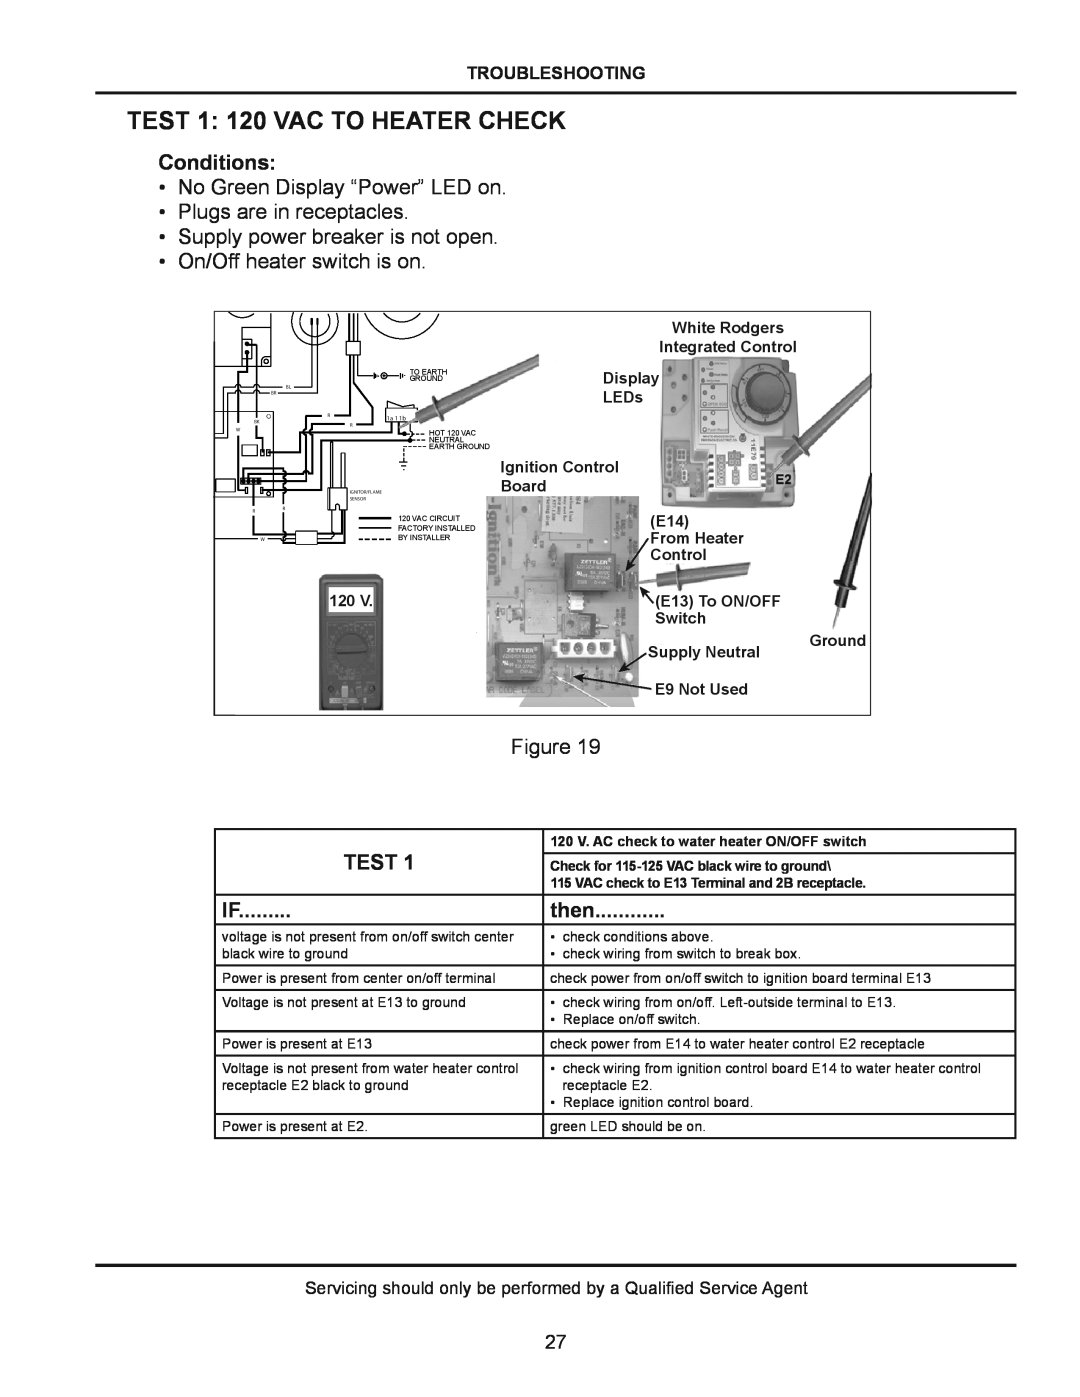 American Water Heater (A)BCG385T500-8N TEST 1 120 VAC TO HEATER CHECK, Conditions, Test, then, Troubleshooting, Switch 